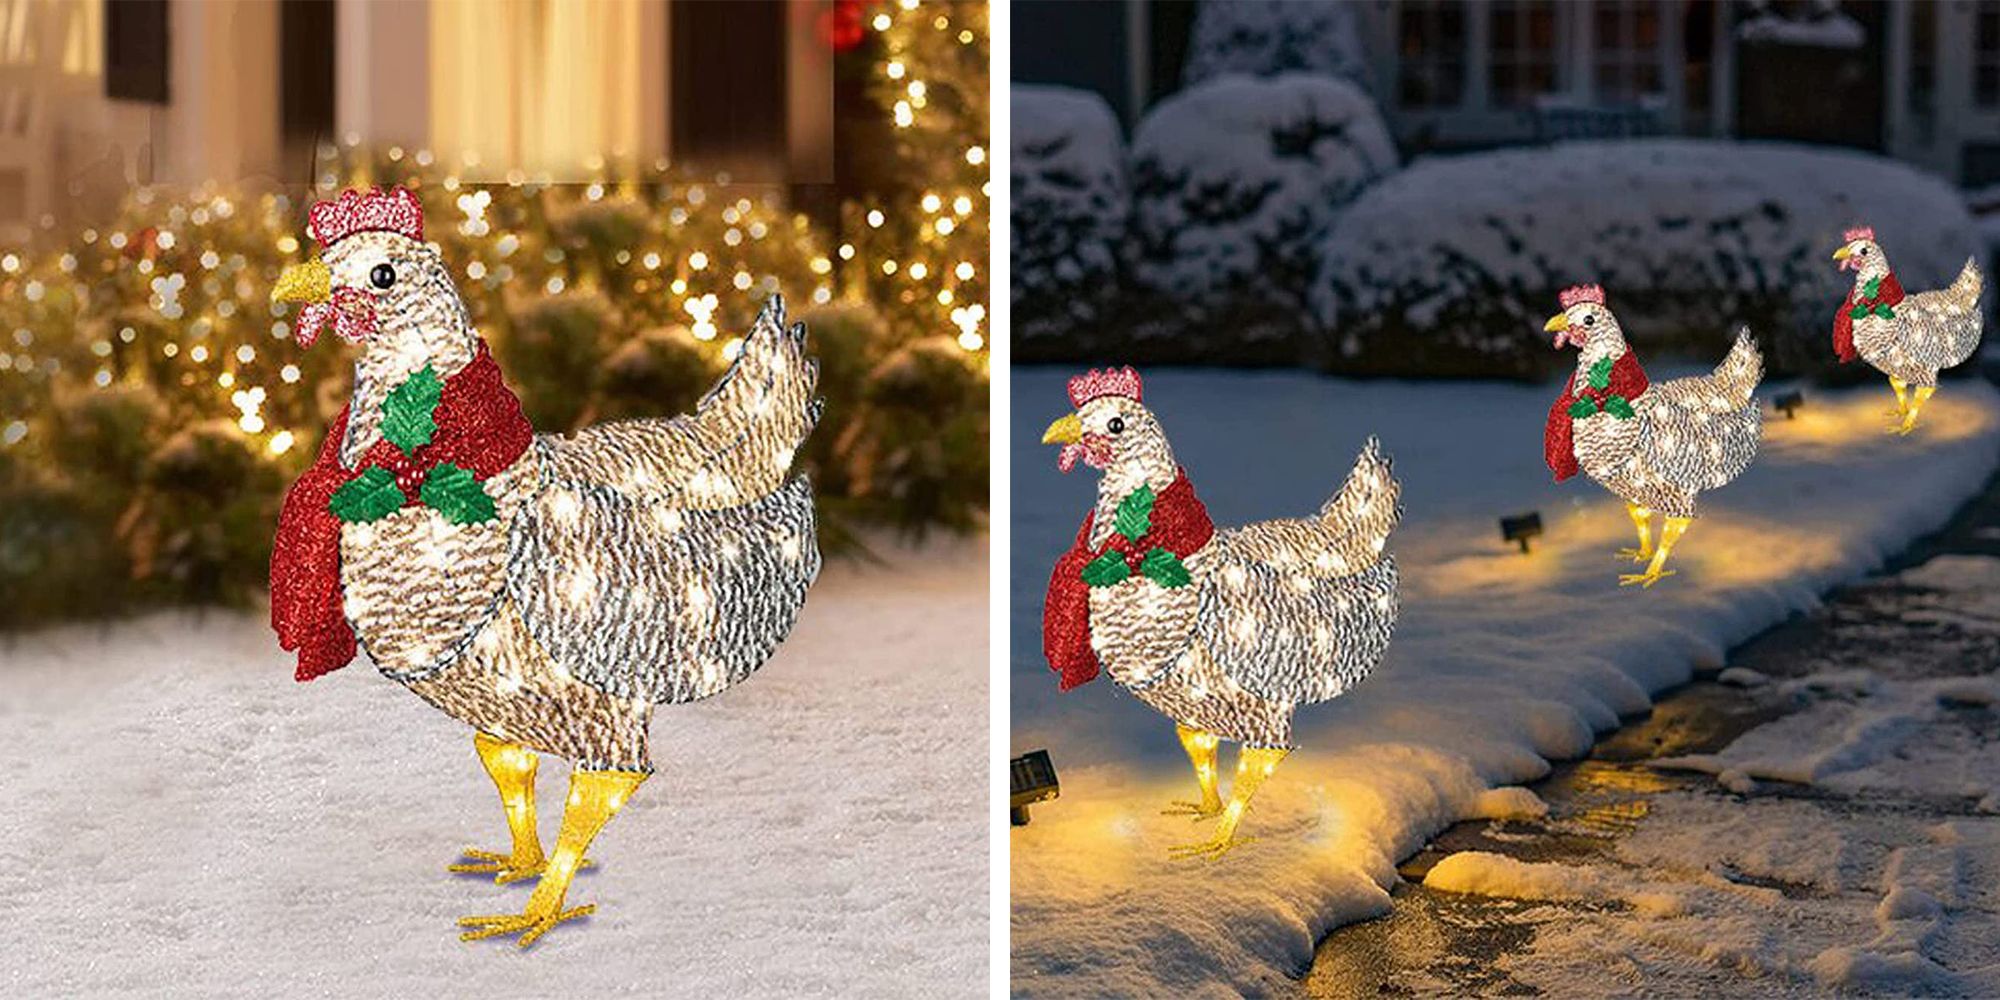 Metal Holiday Thanksgiving Christmas Chicken Lights Ornaments Decoration with 50 Mini Lights Rooster Animal Garden Stakes for Ground Lawn Outdoor Decor Light-Up Chicken with Scarf Holiday Decoration Small 